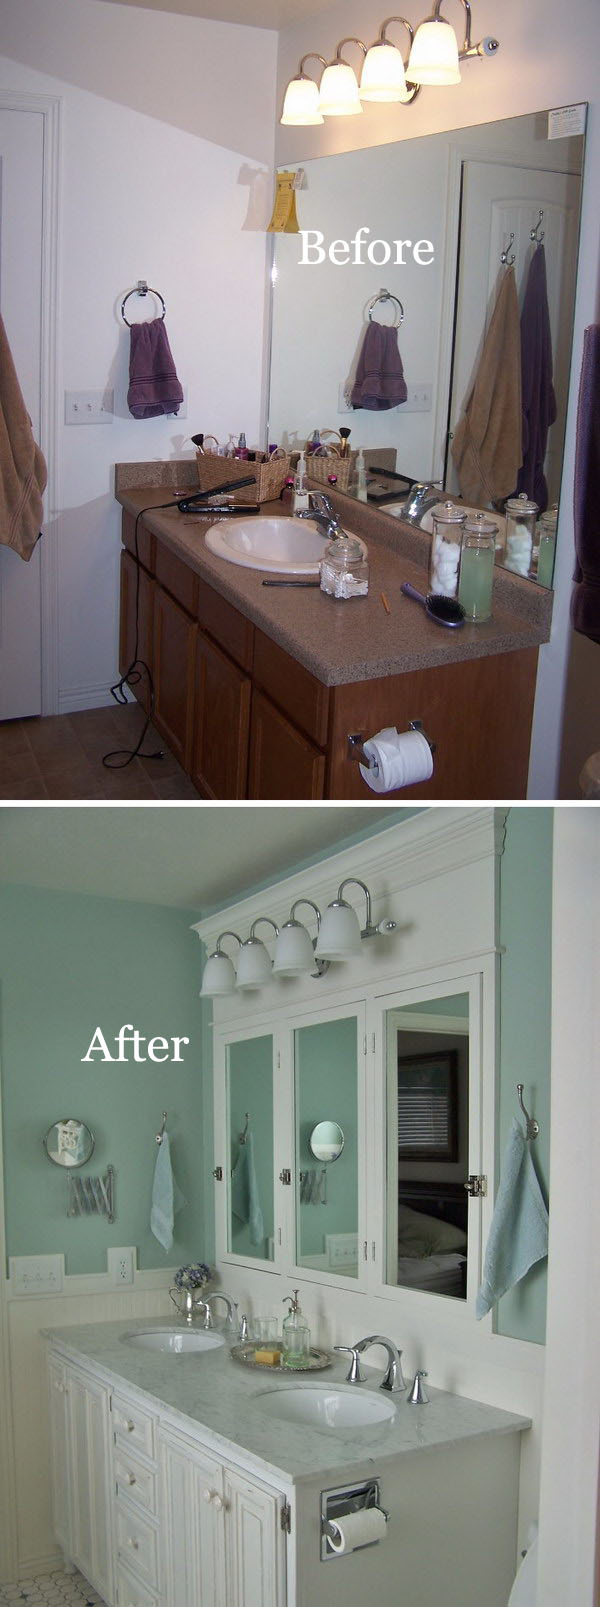 Master Bathroom Remodel With Blue Painted Walls. 